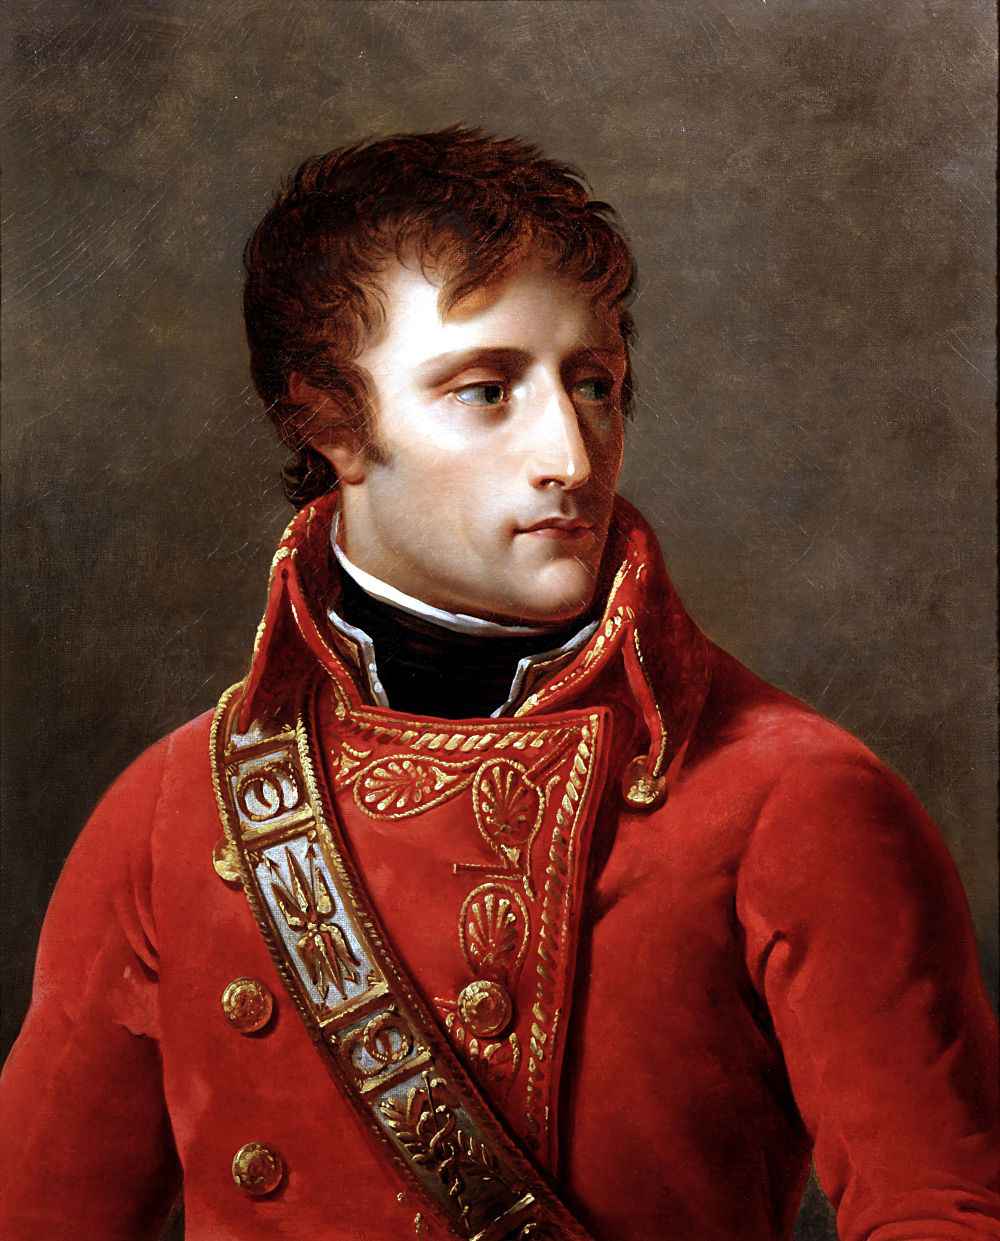 When was Napoleon crowned Emperor of France?